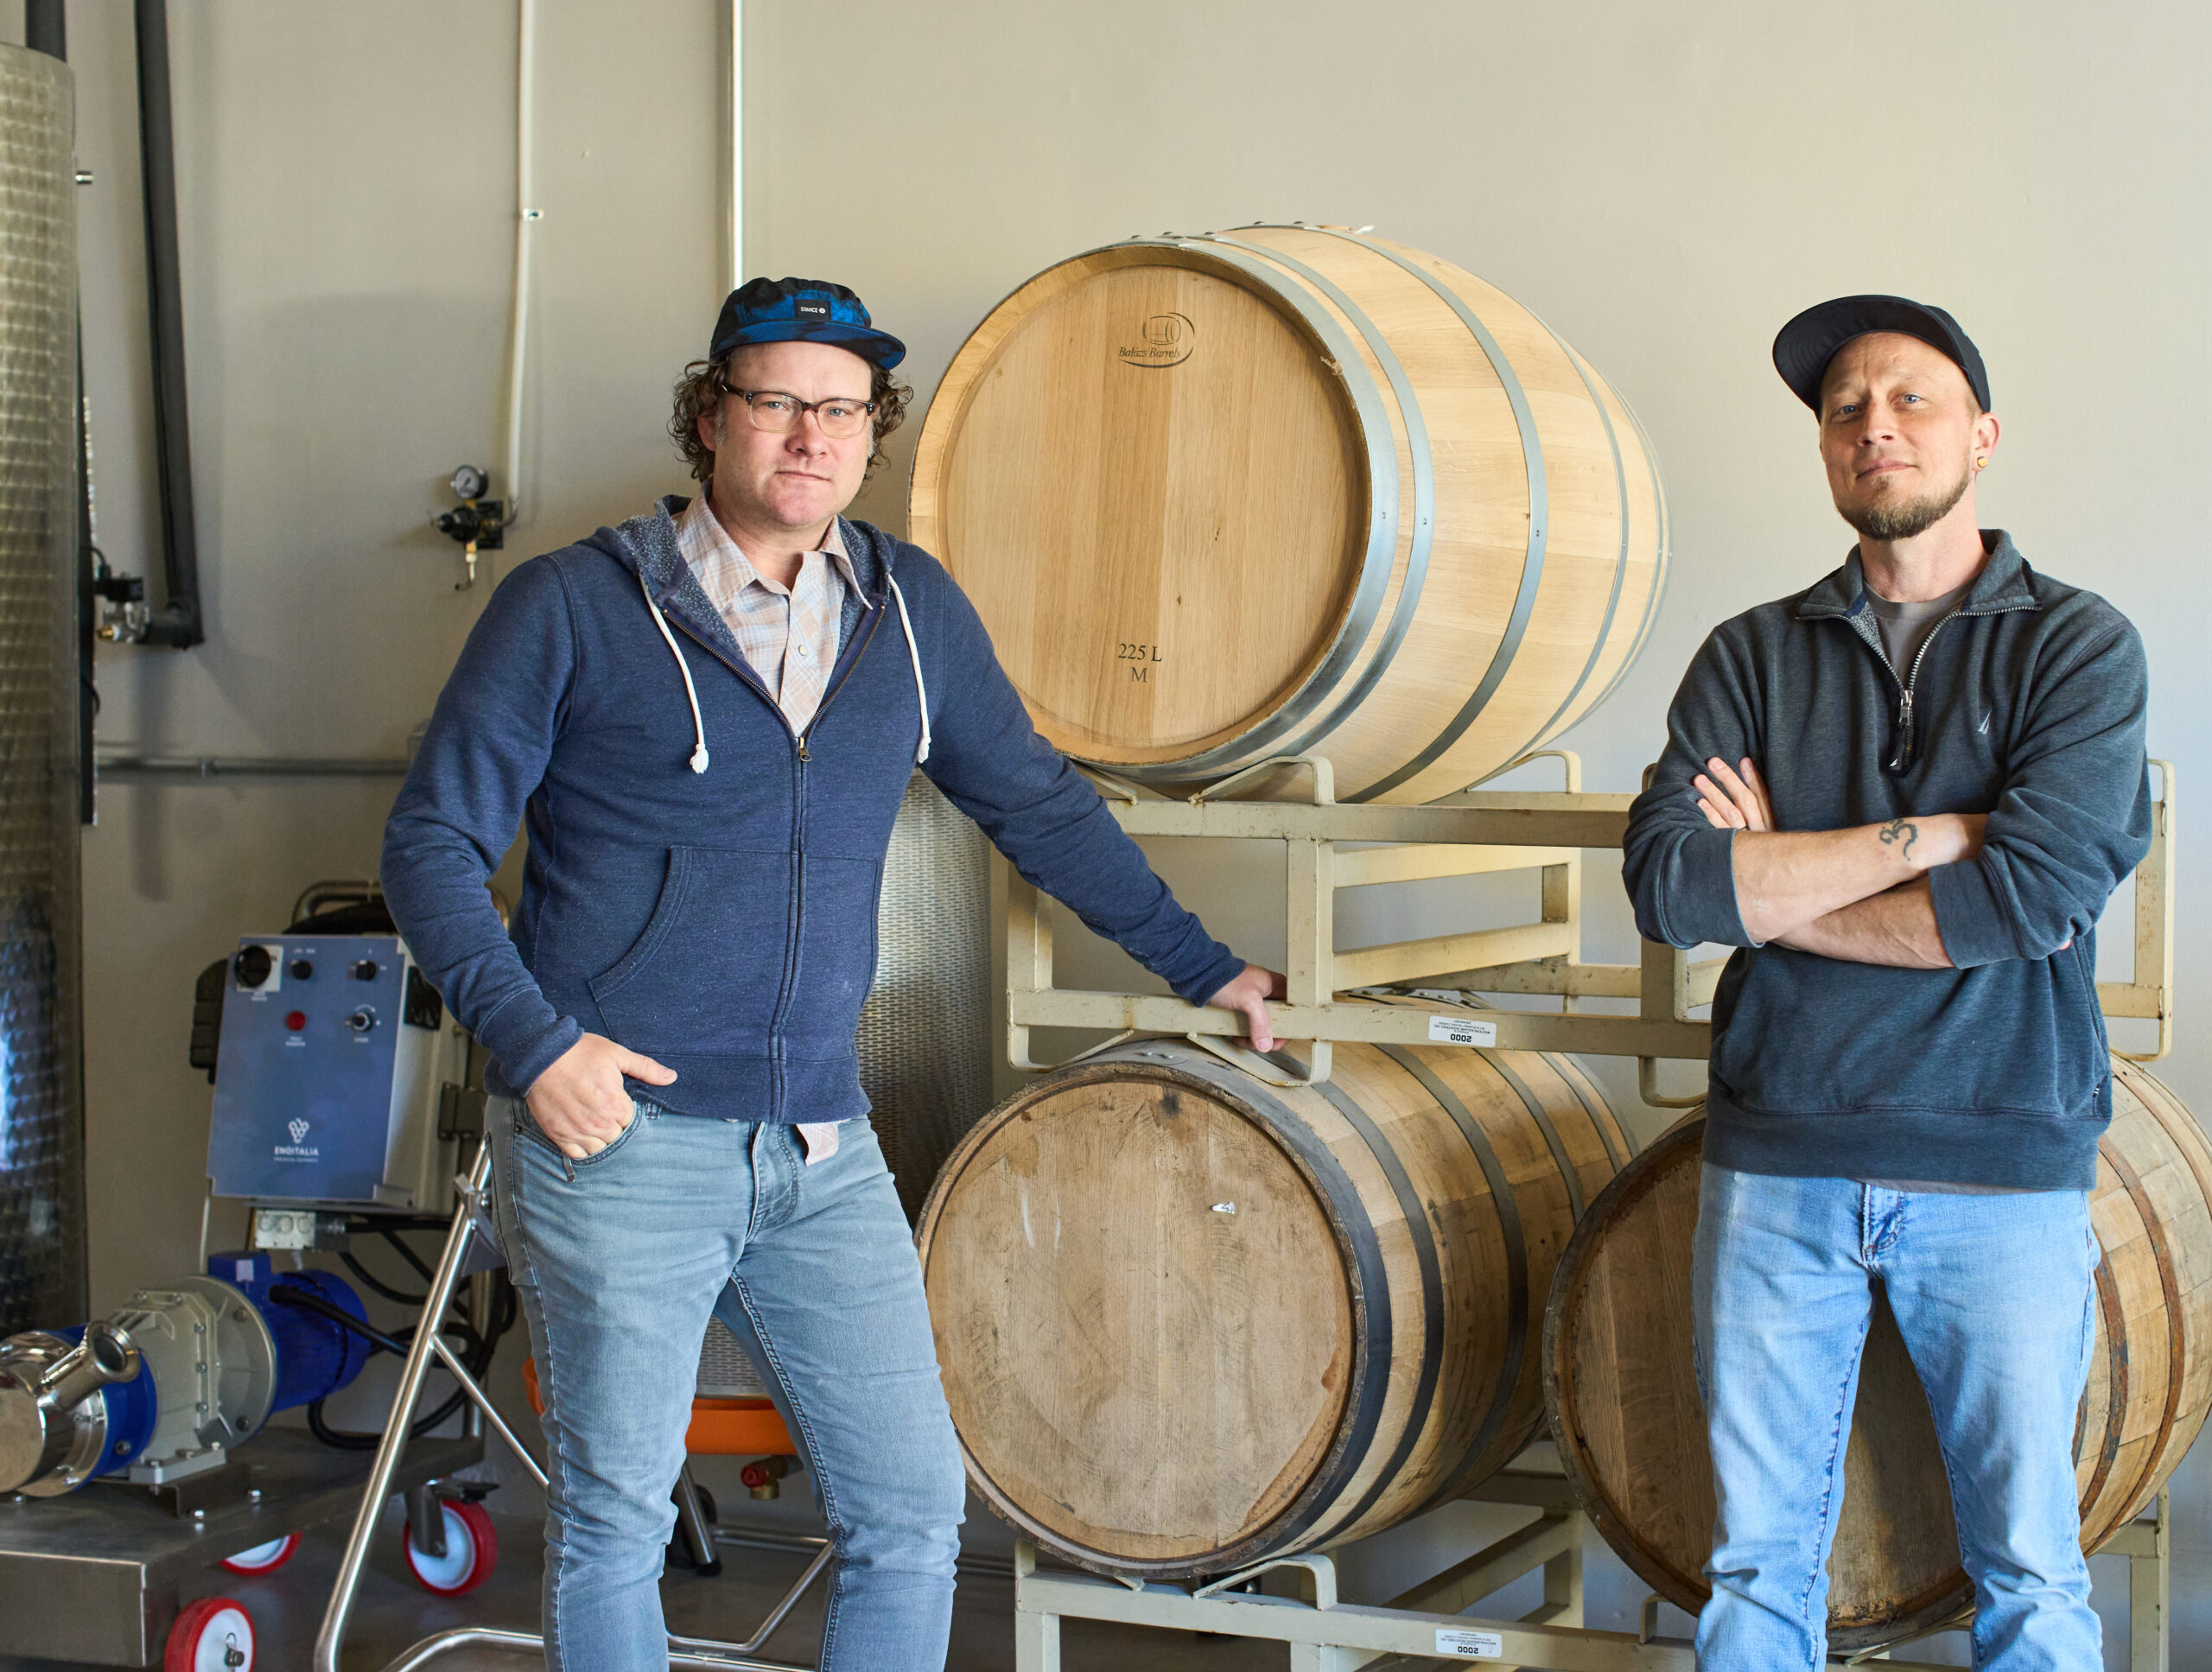 Aaron Sizemore and David Armstrong, owners of Nomad Wine Works, a microwinery in High Point, NC.